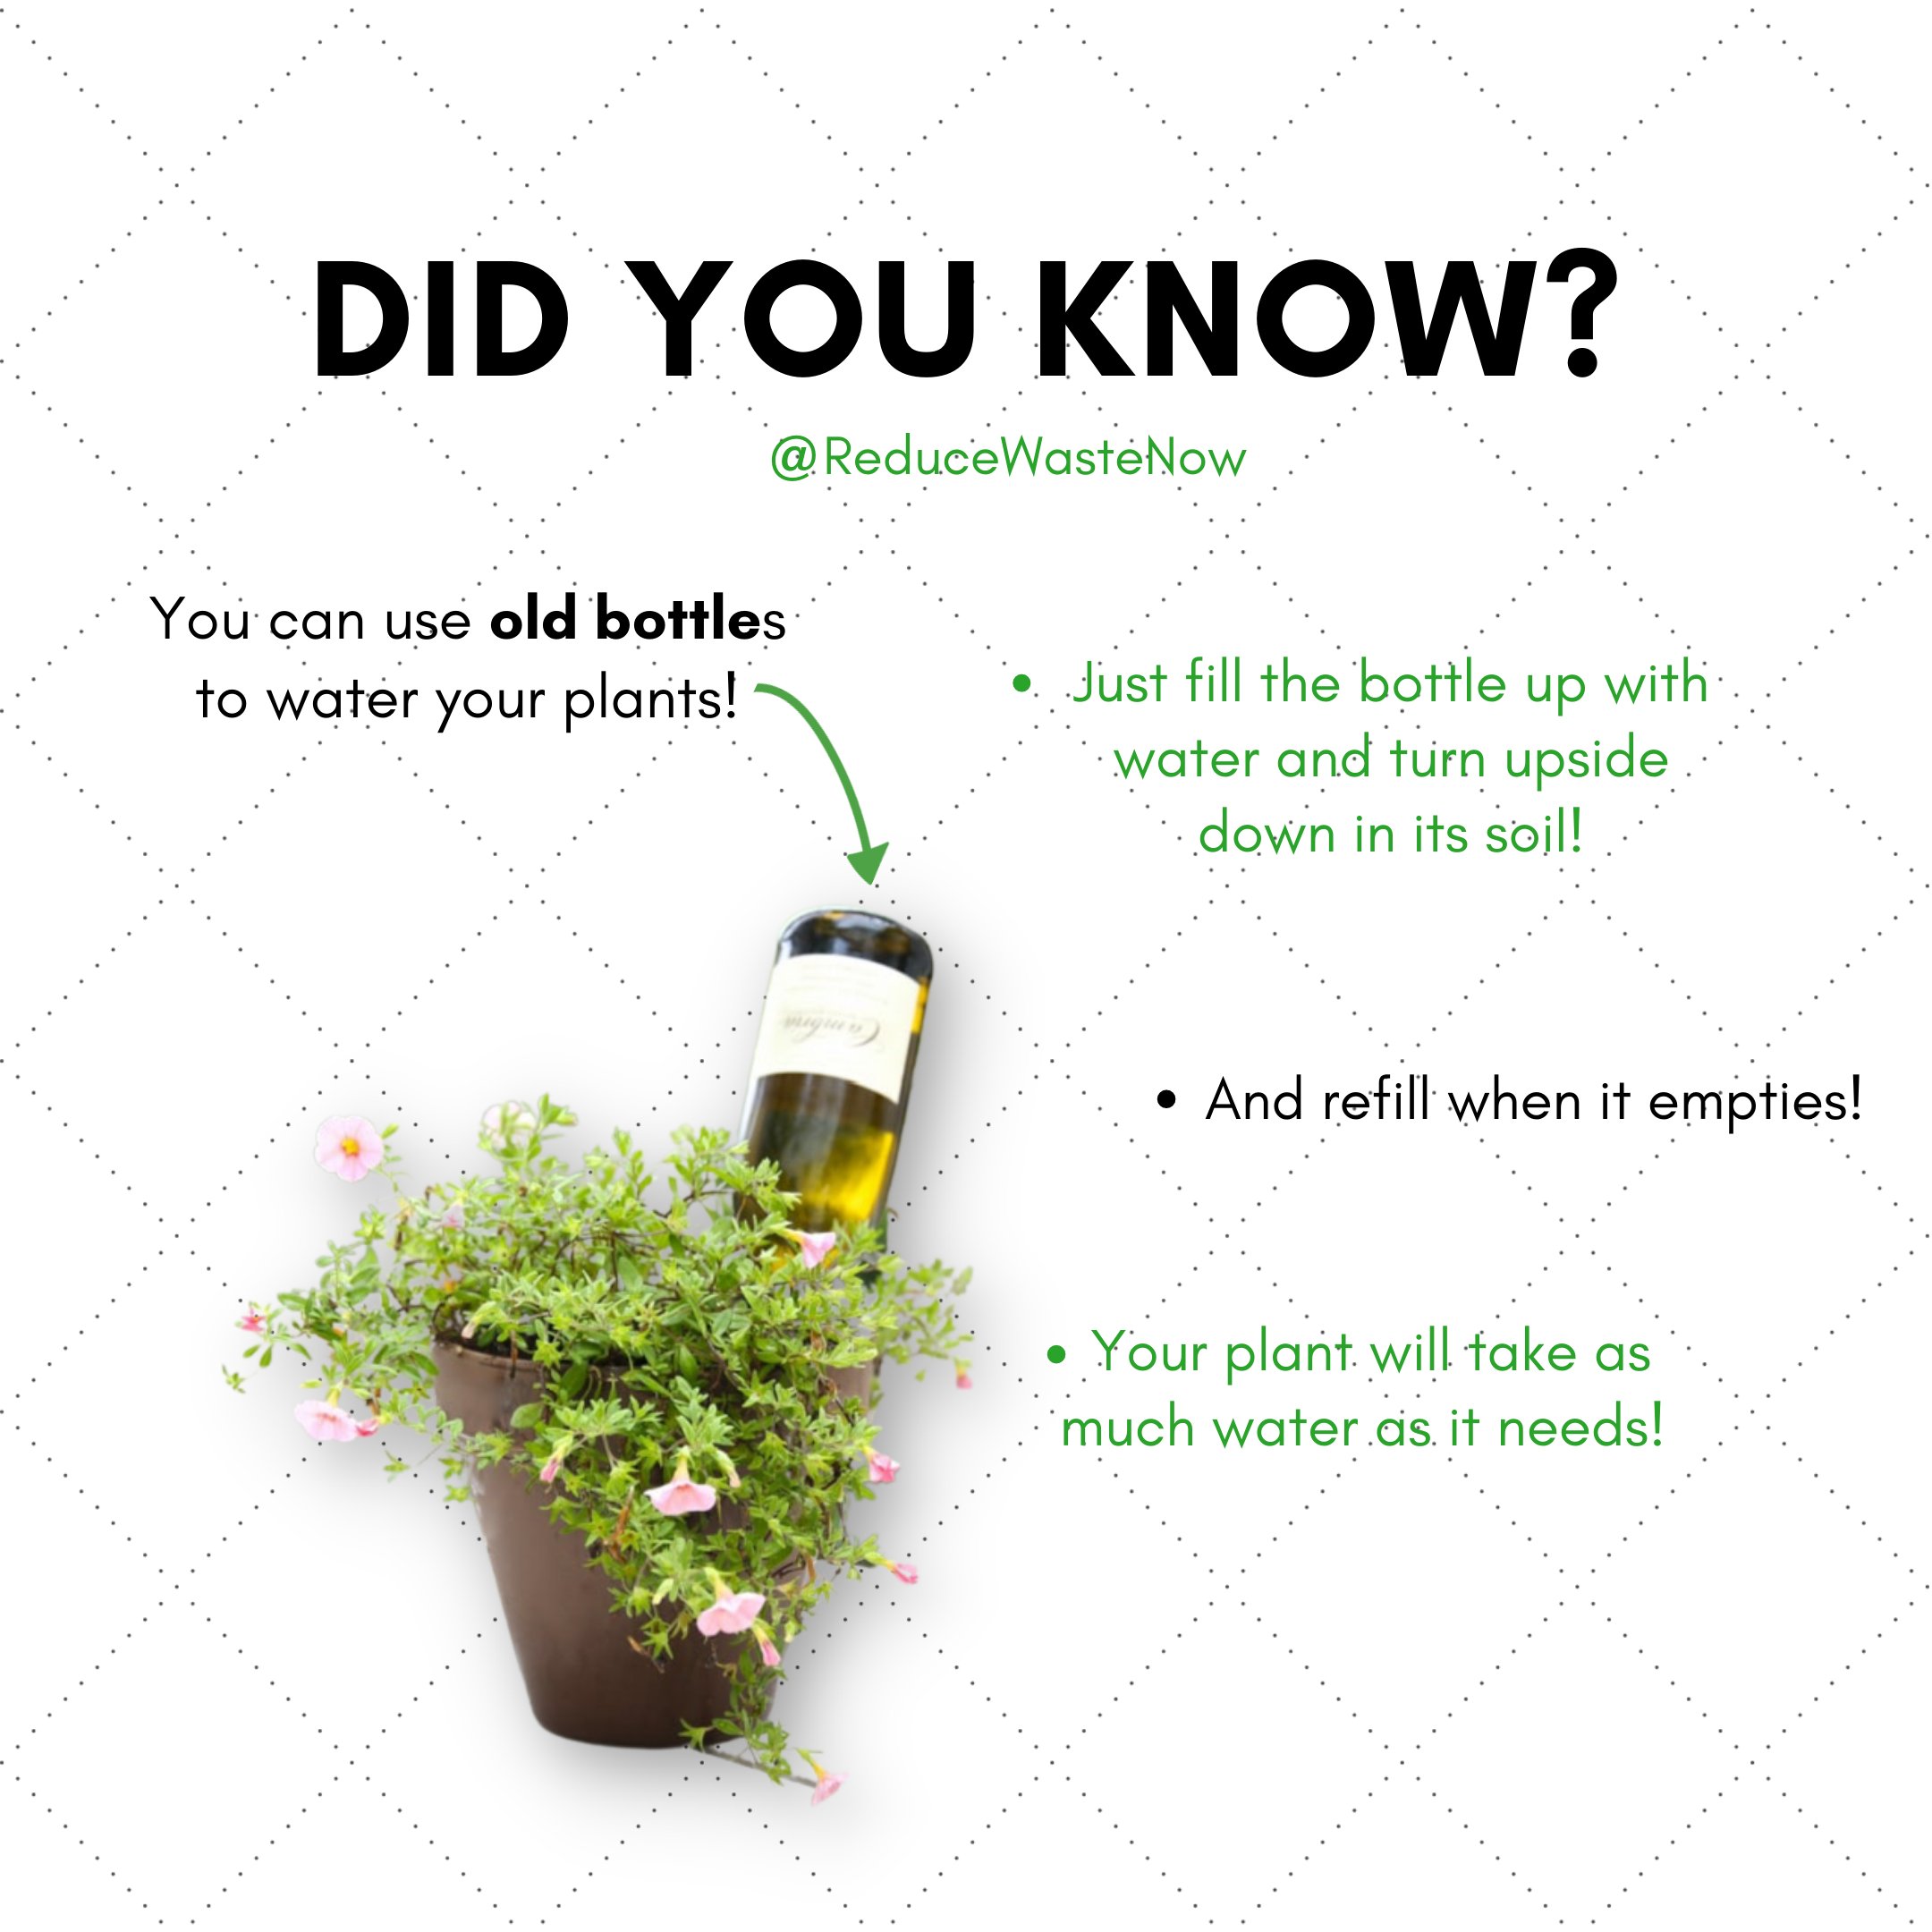 ReduceWasteNow on Twitter: "Whether going away for the weekend or are a forgetful plant-caretaker, this is a great way reuse your bottle/jugs and water your garden! 🌎 #zerowaste #plasticfree #